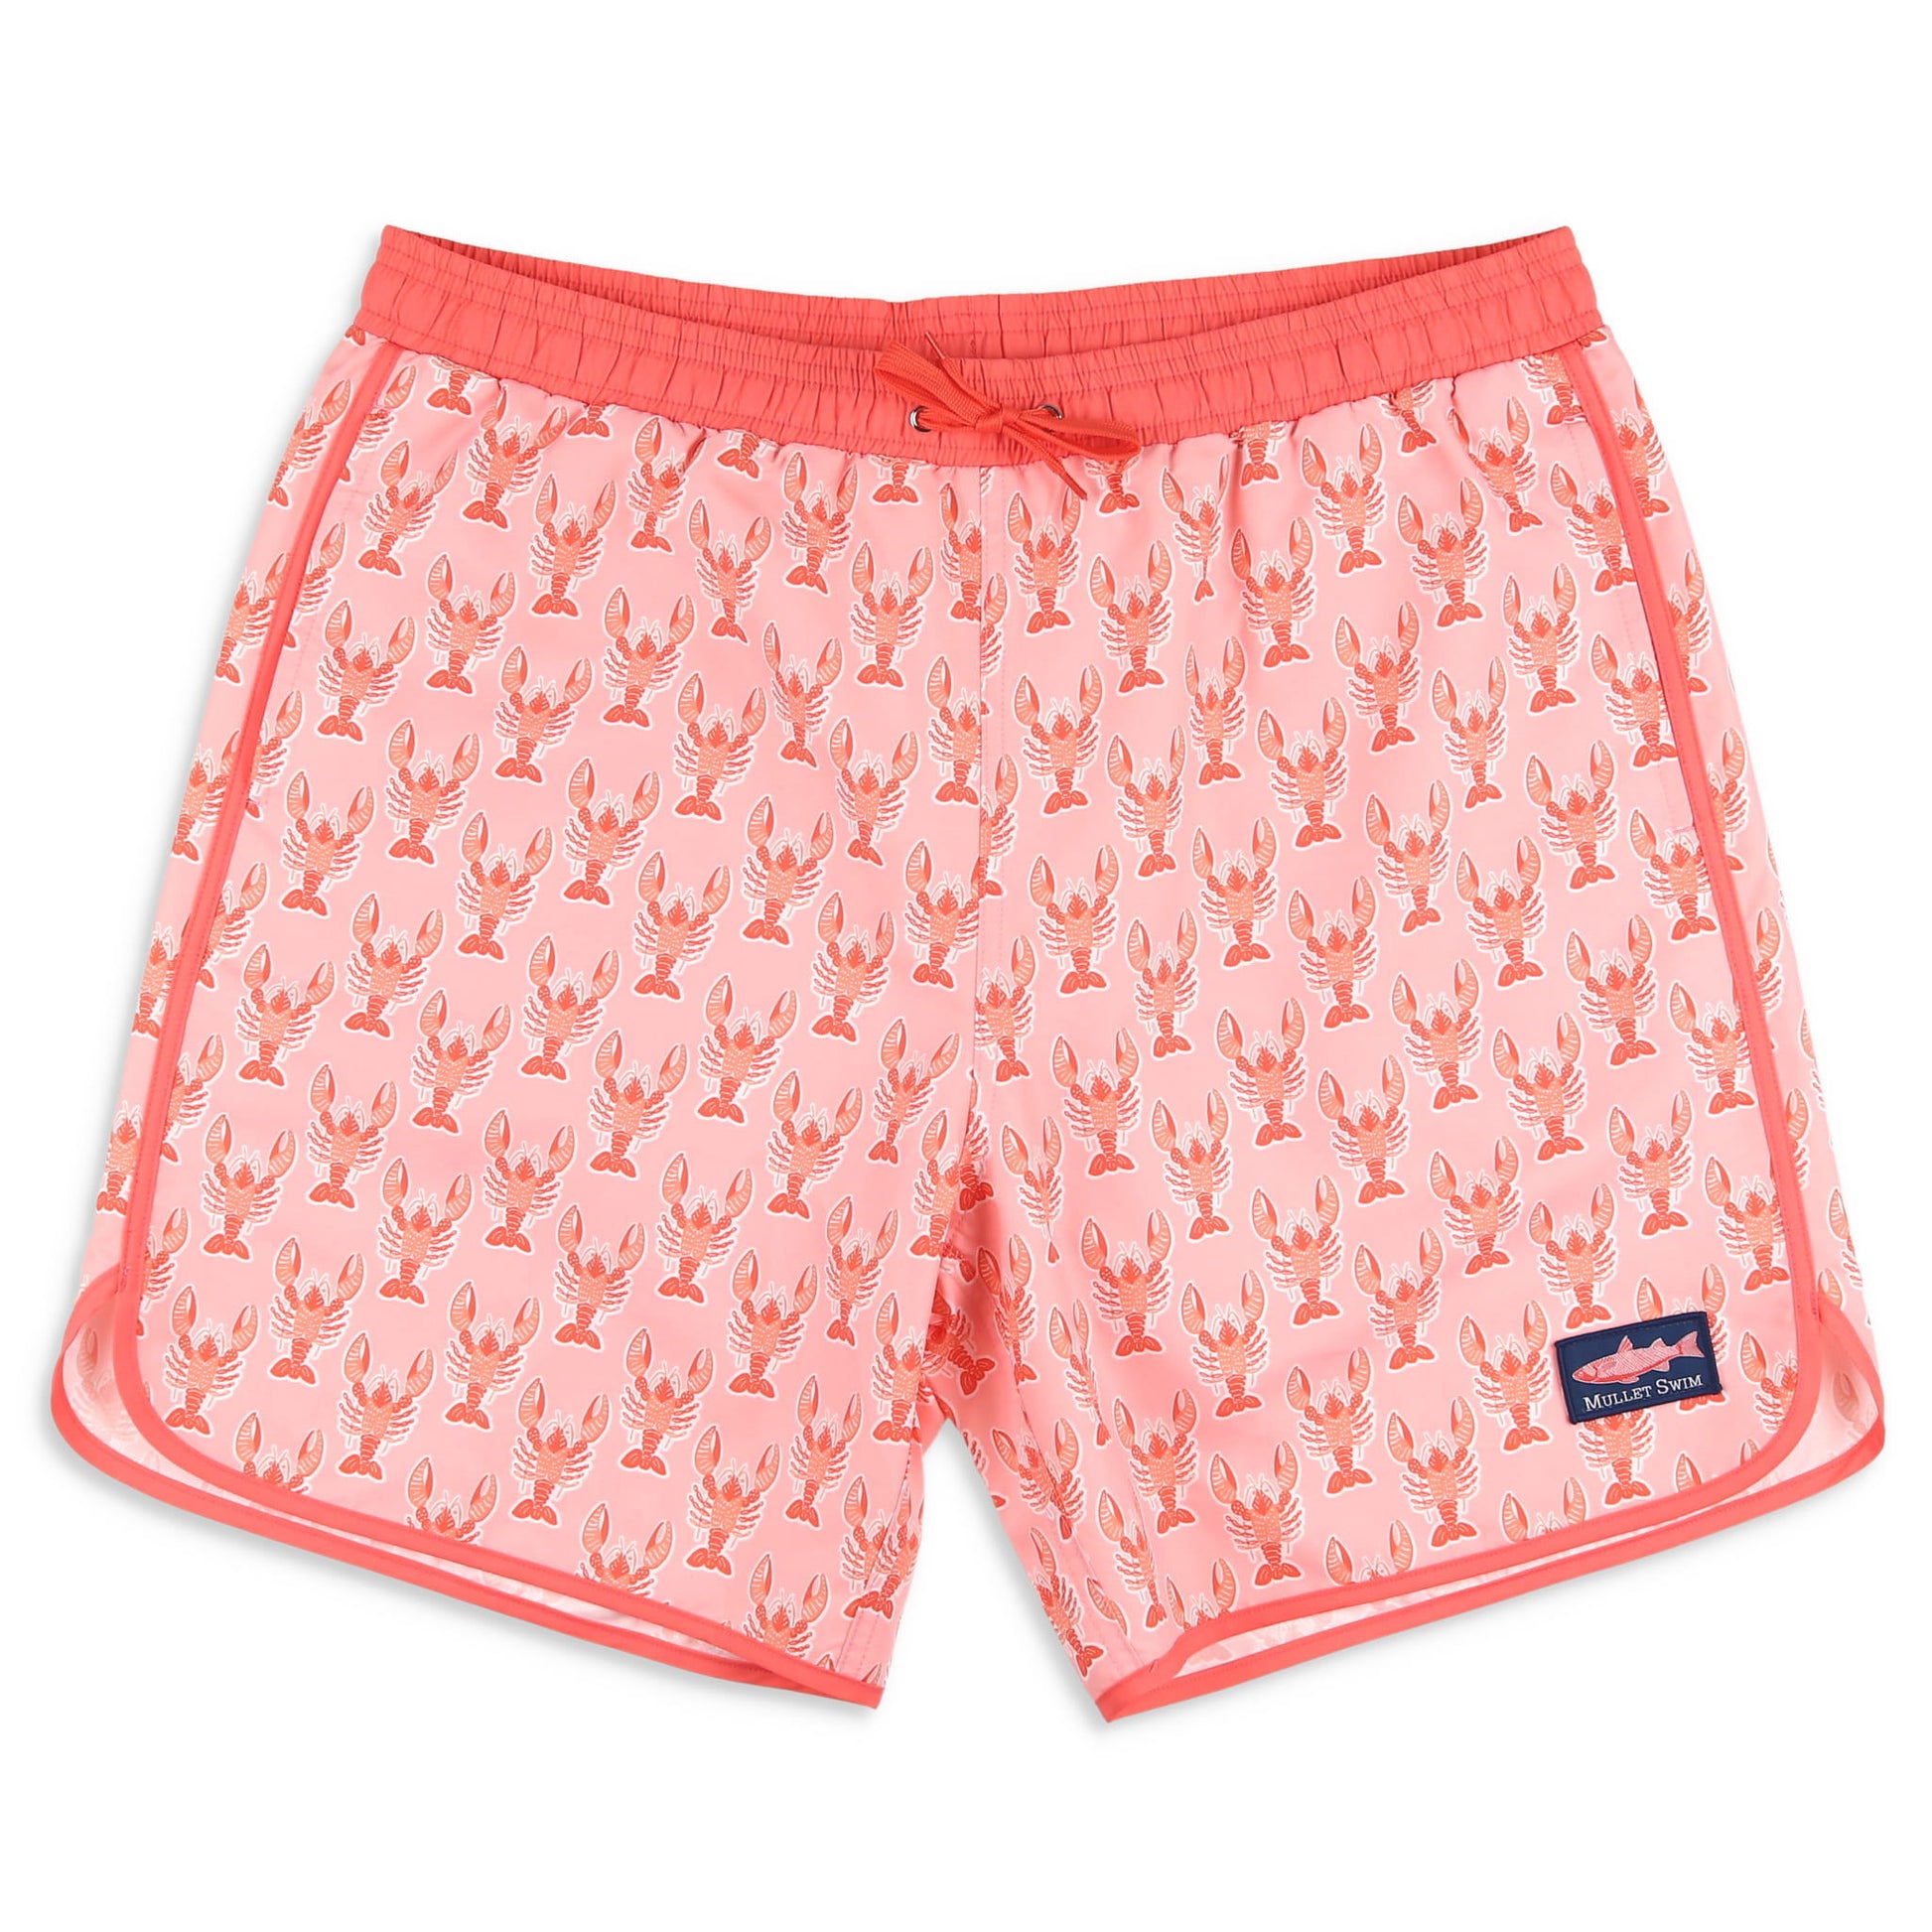 What To Wear With Pink Shorts? 38 Pink Shorts Outfits for